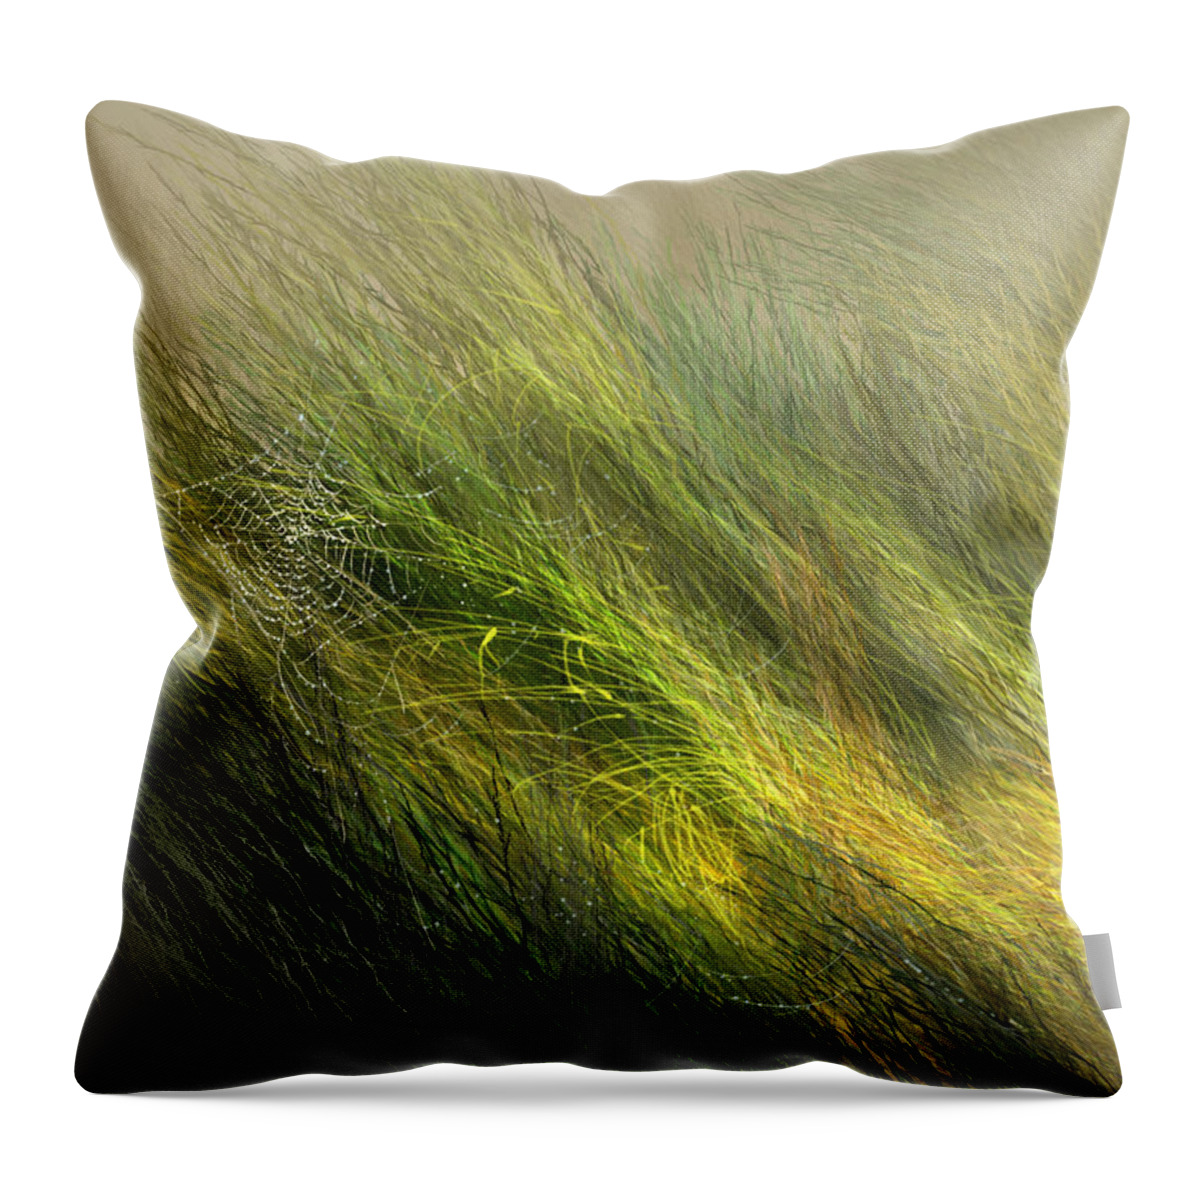 Landscape Throw Pillow featuring the digital art Morning Dew Drops by Aaron Blaise